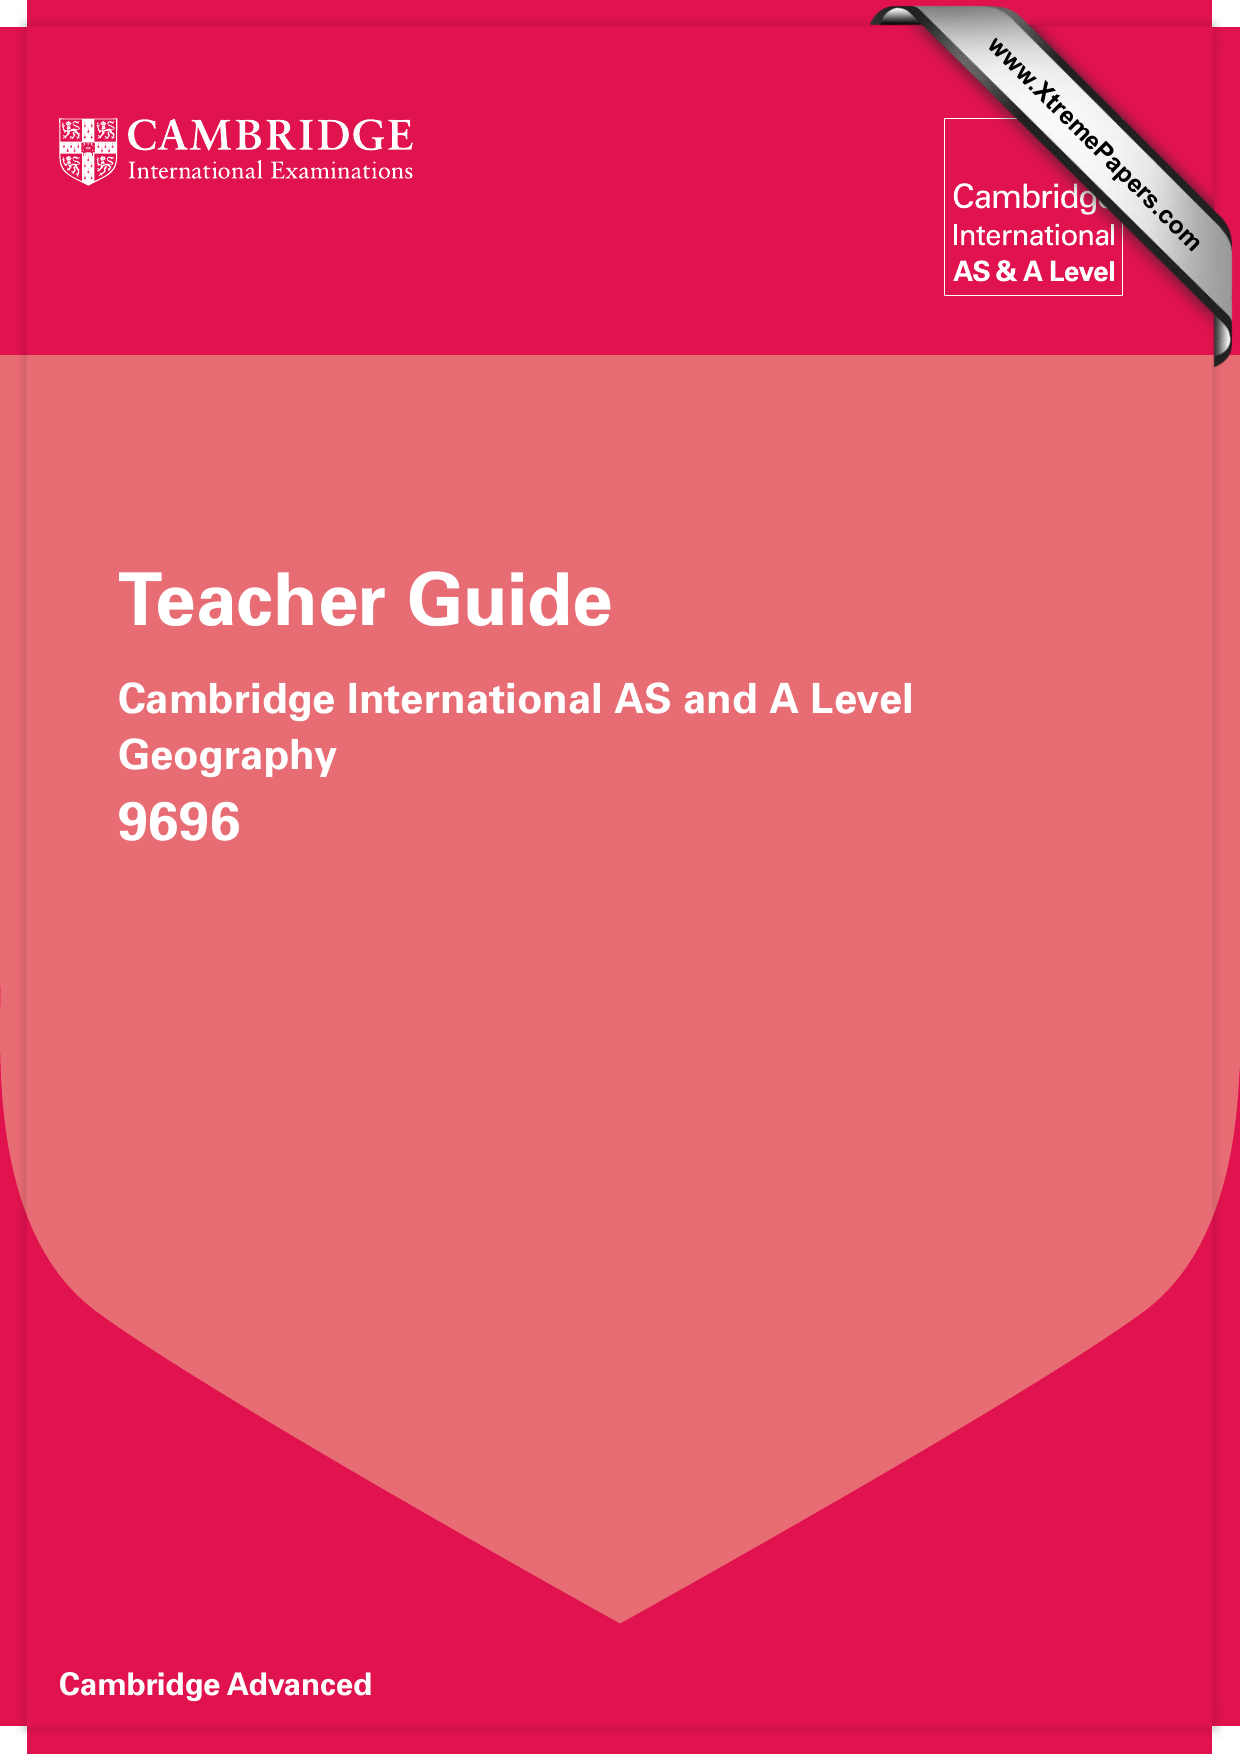 teacher-guide-9696-cambridge-international-as-and-a-level-geography